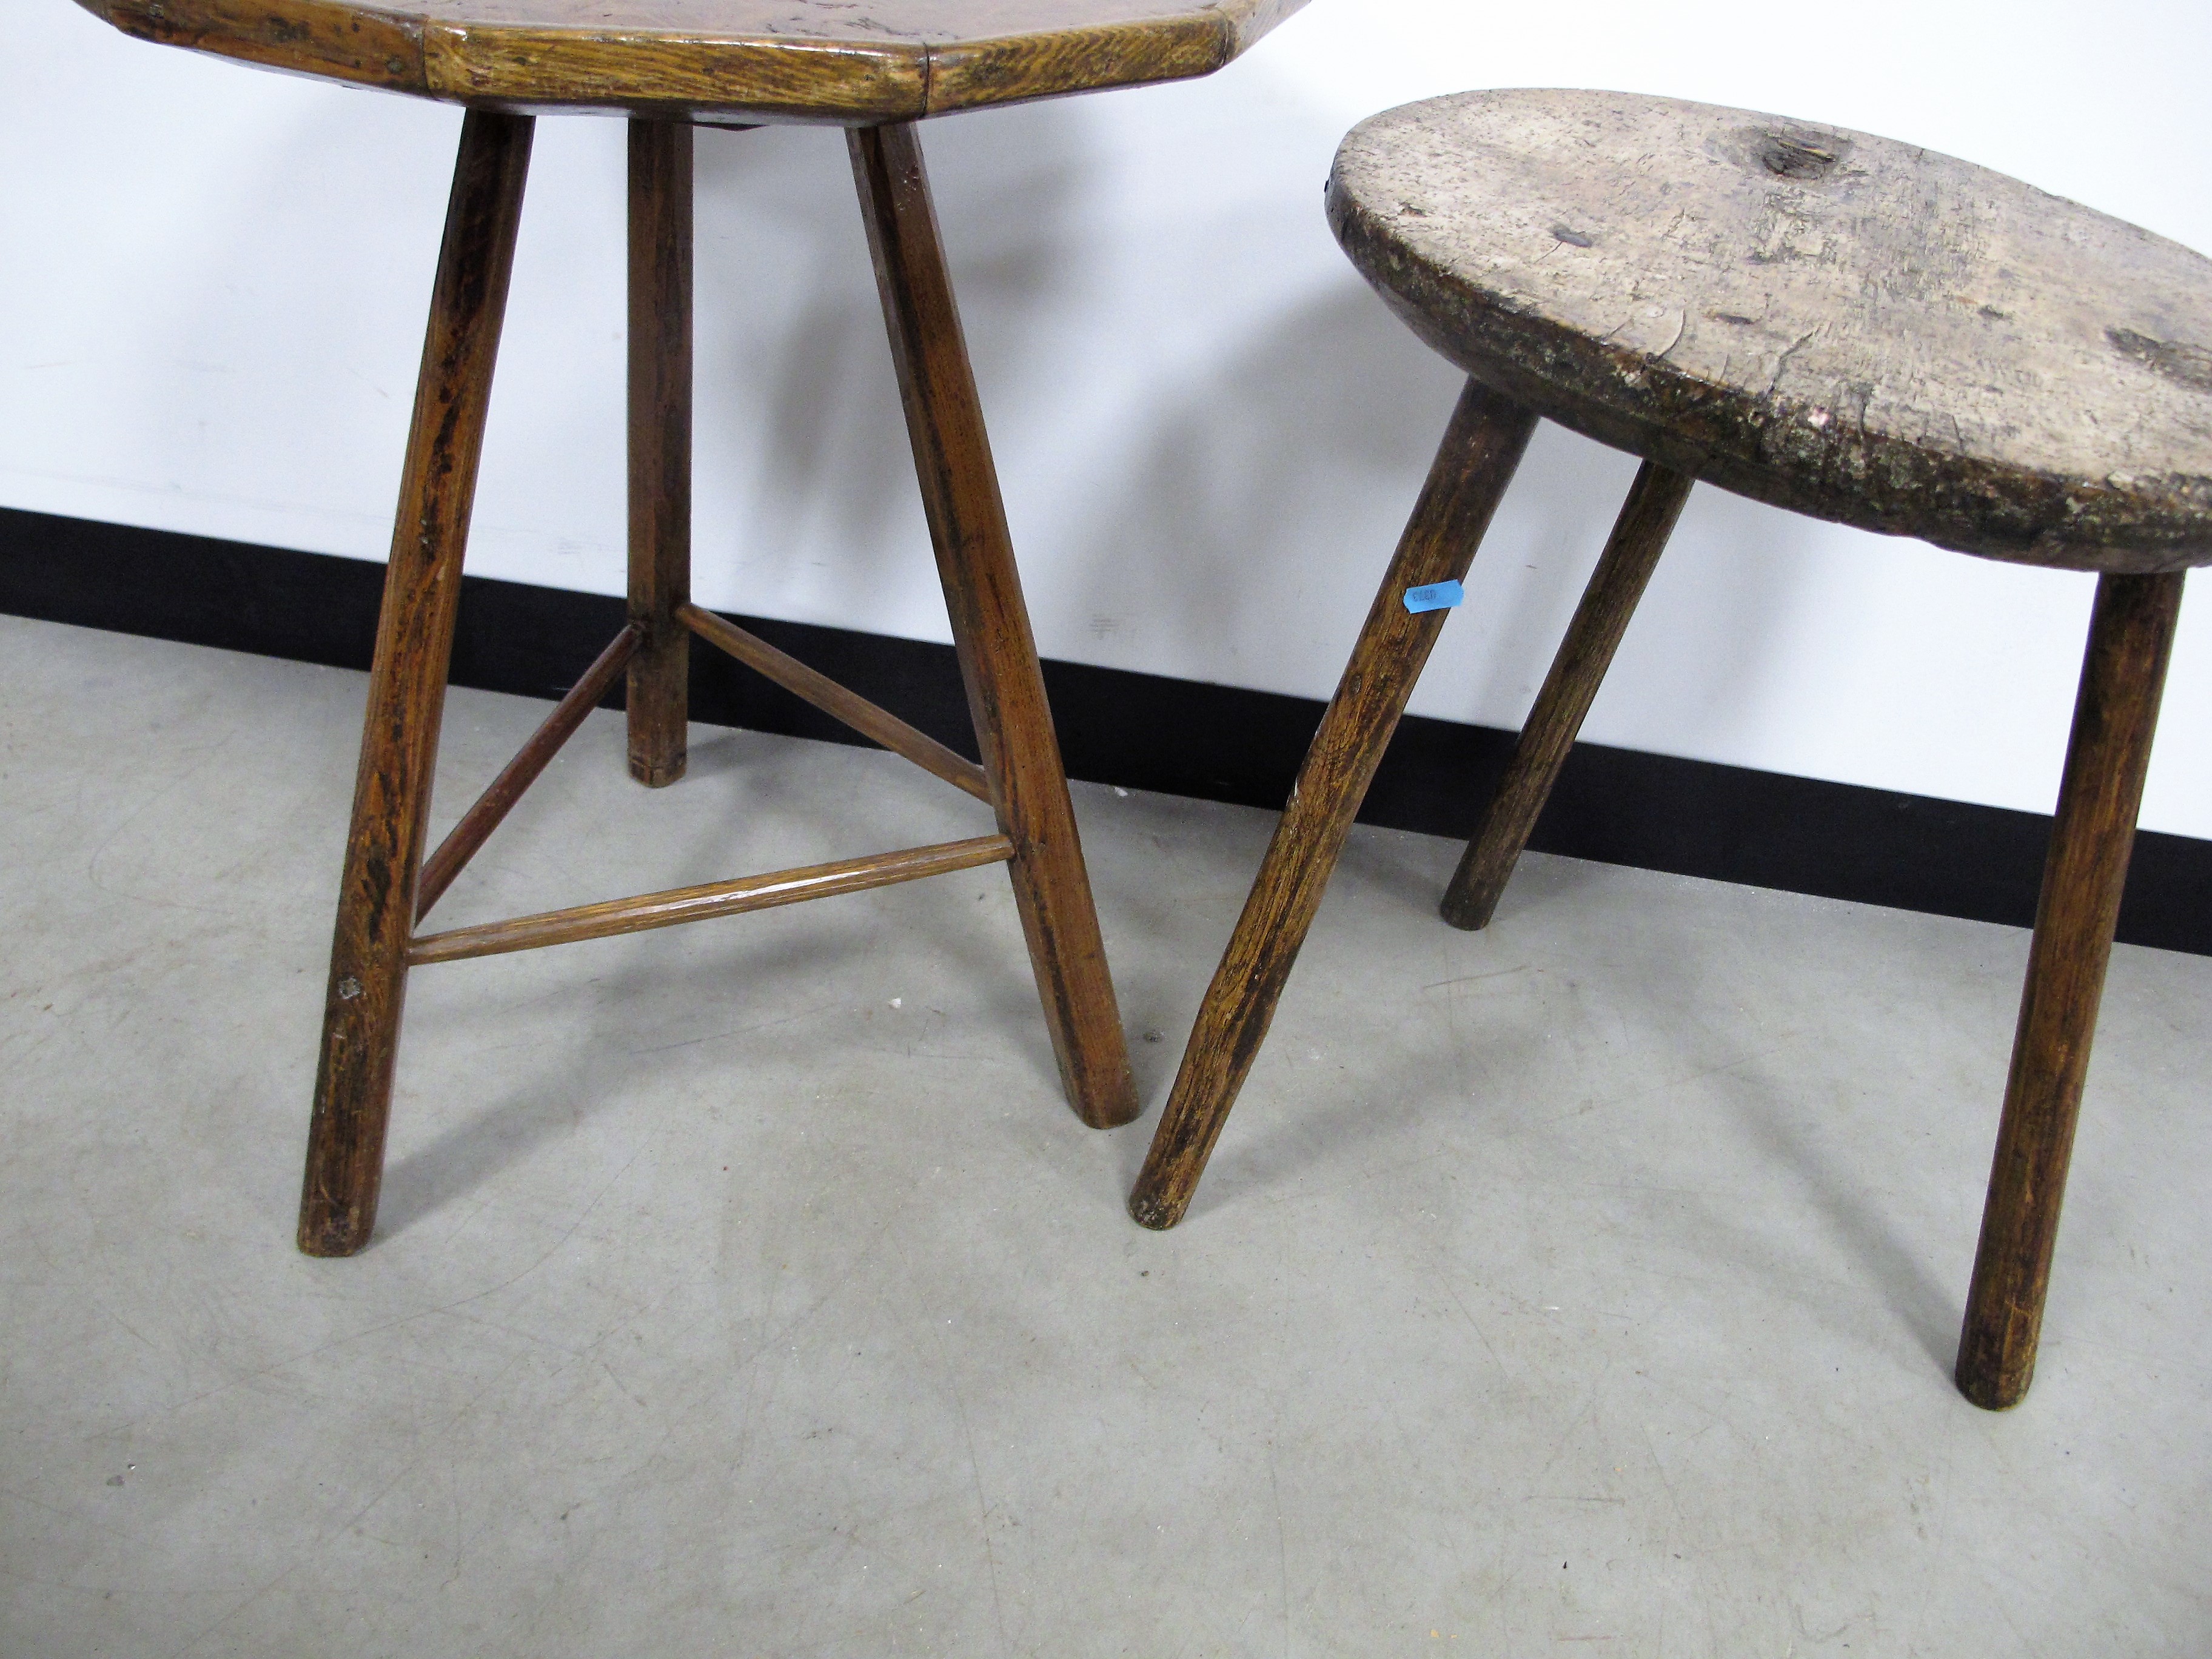 Two antique Cricket tables, one with a octagonal elm top the other from a fruitwood, 52cm x 66cm and - Image 3 of 8